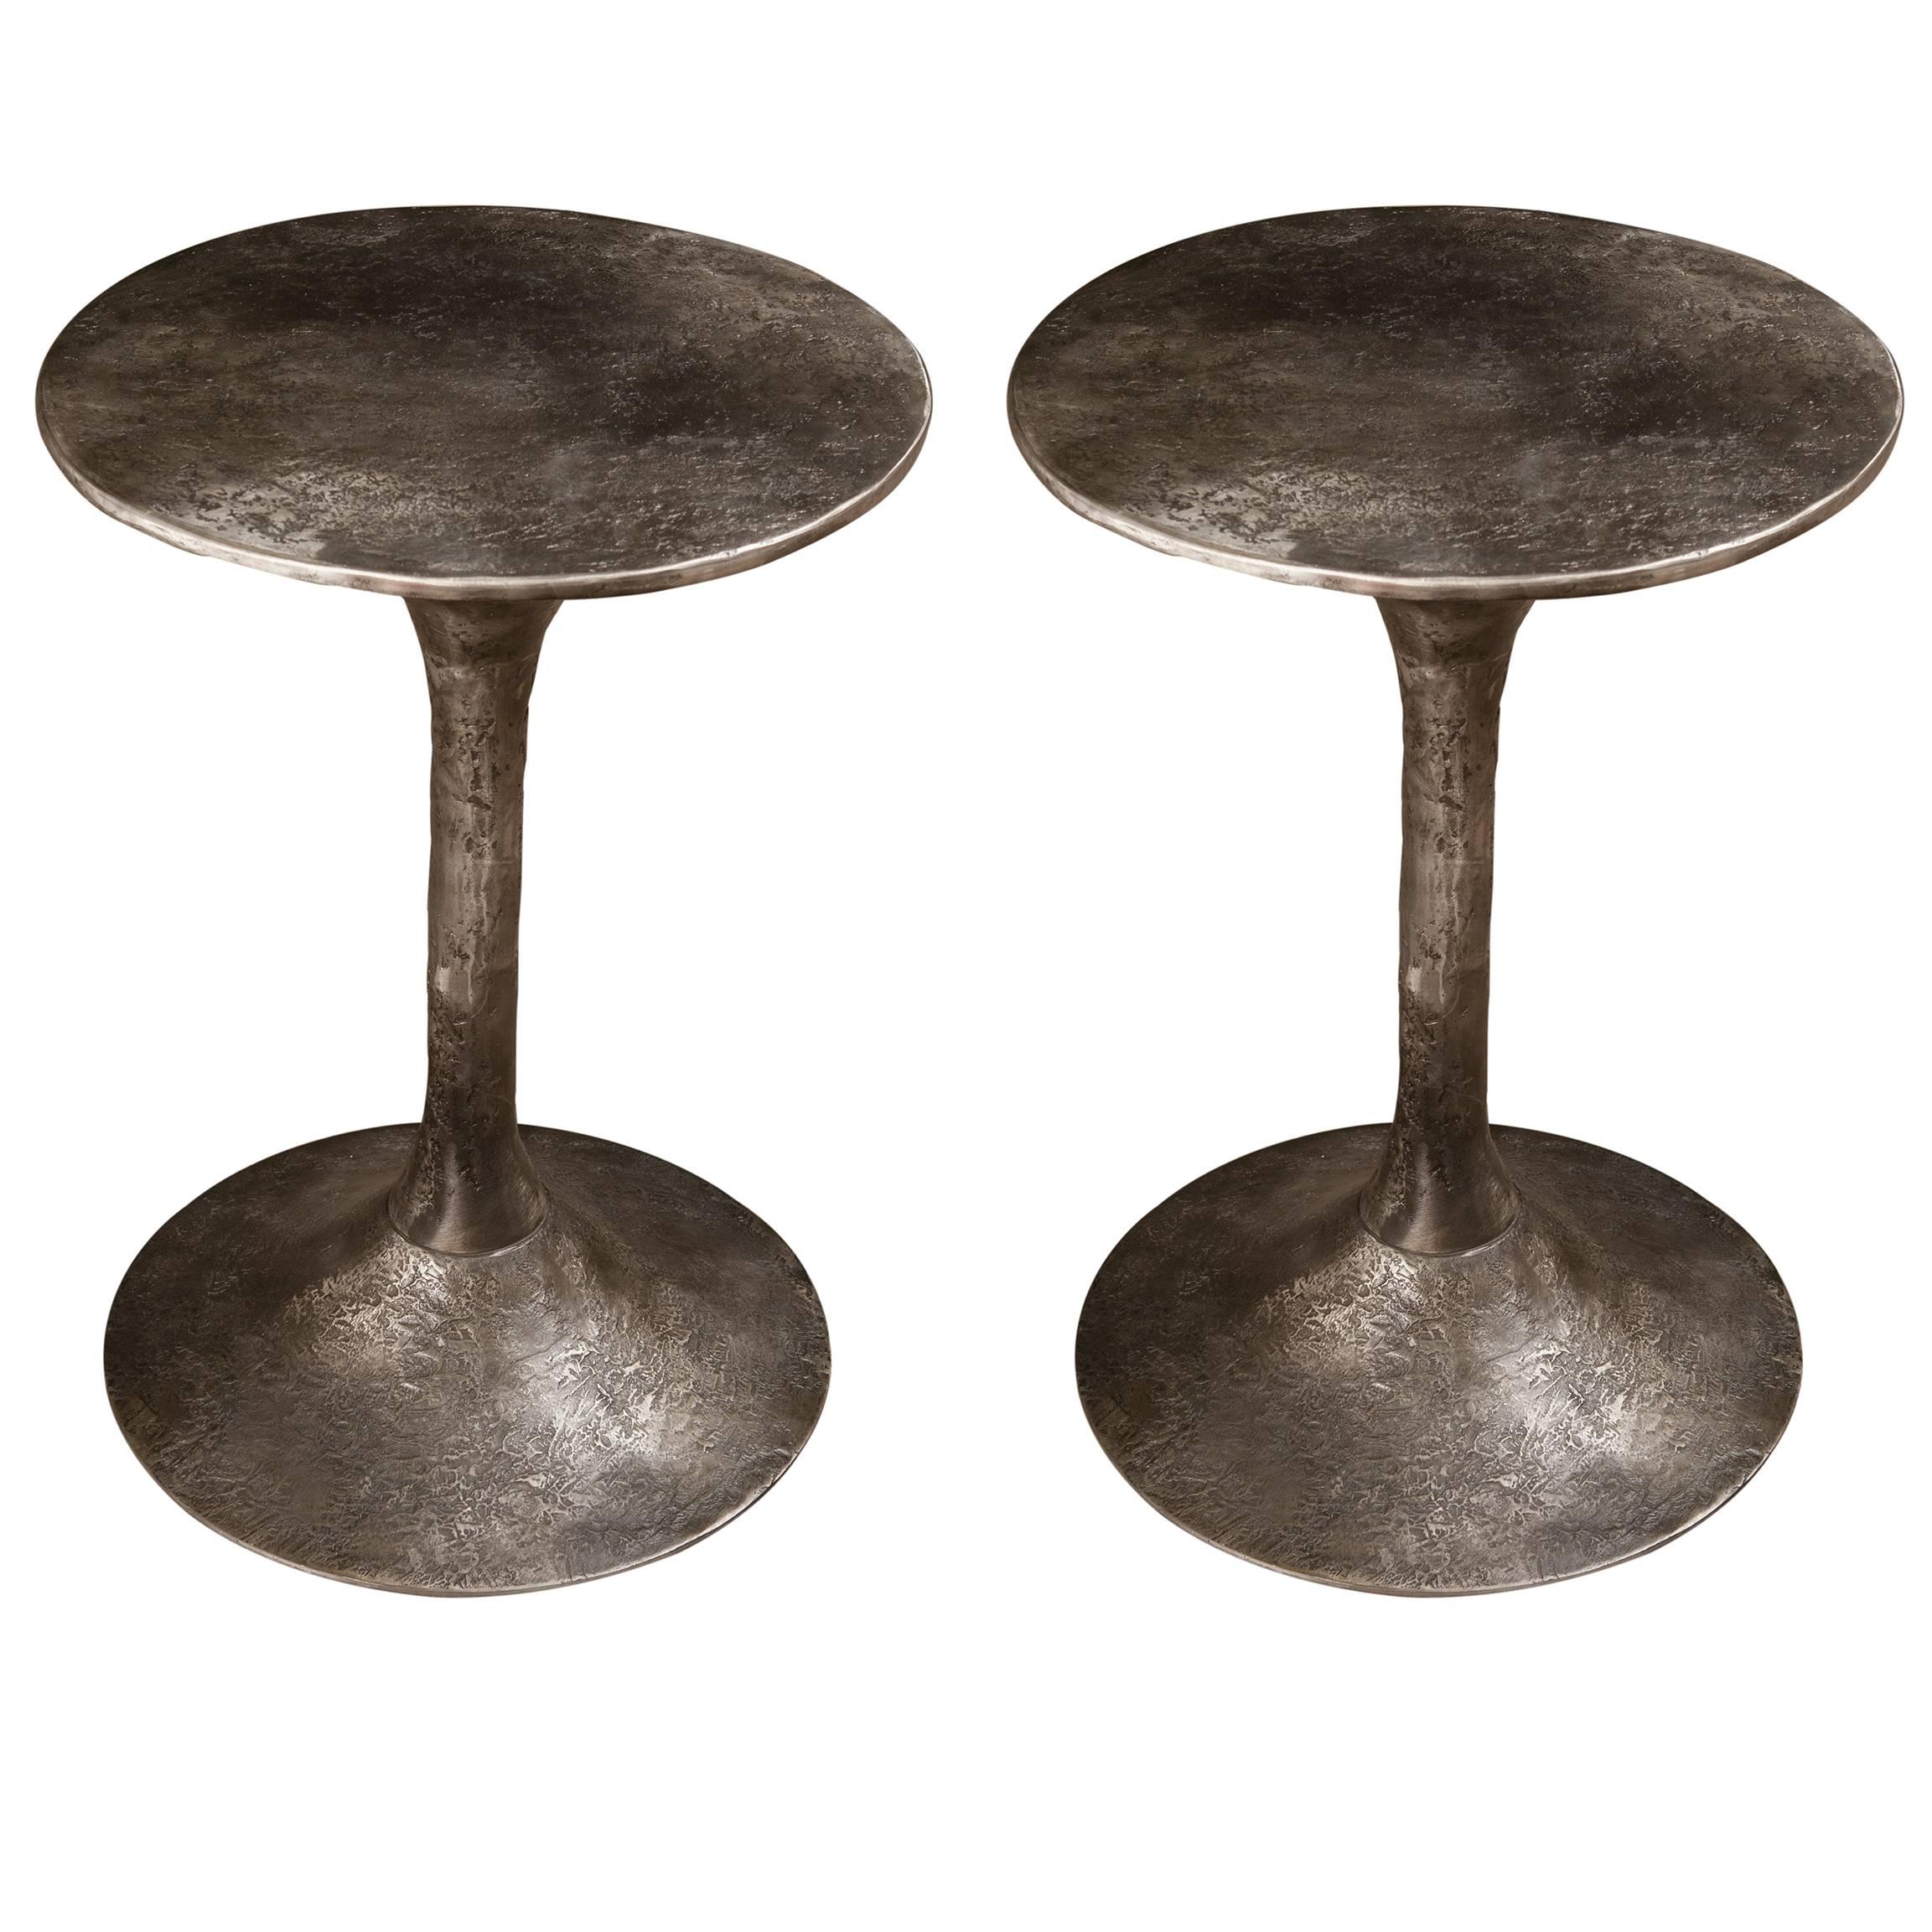 Pair of Cast Aluminium Industrial Side Tables from France